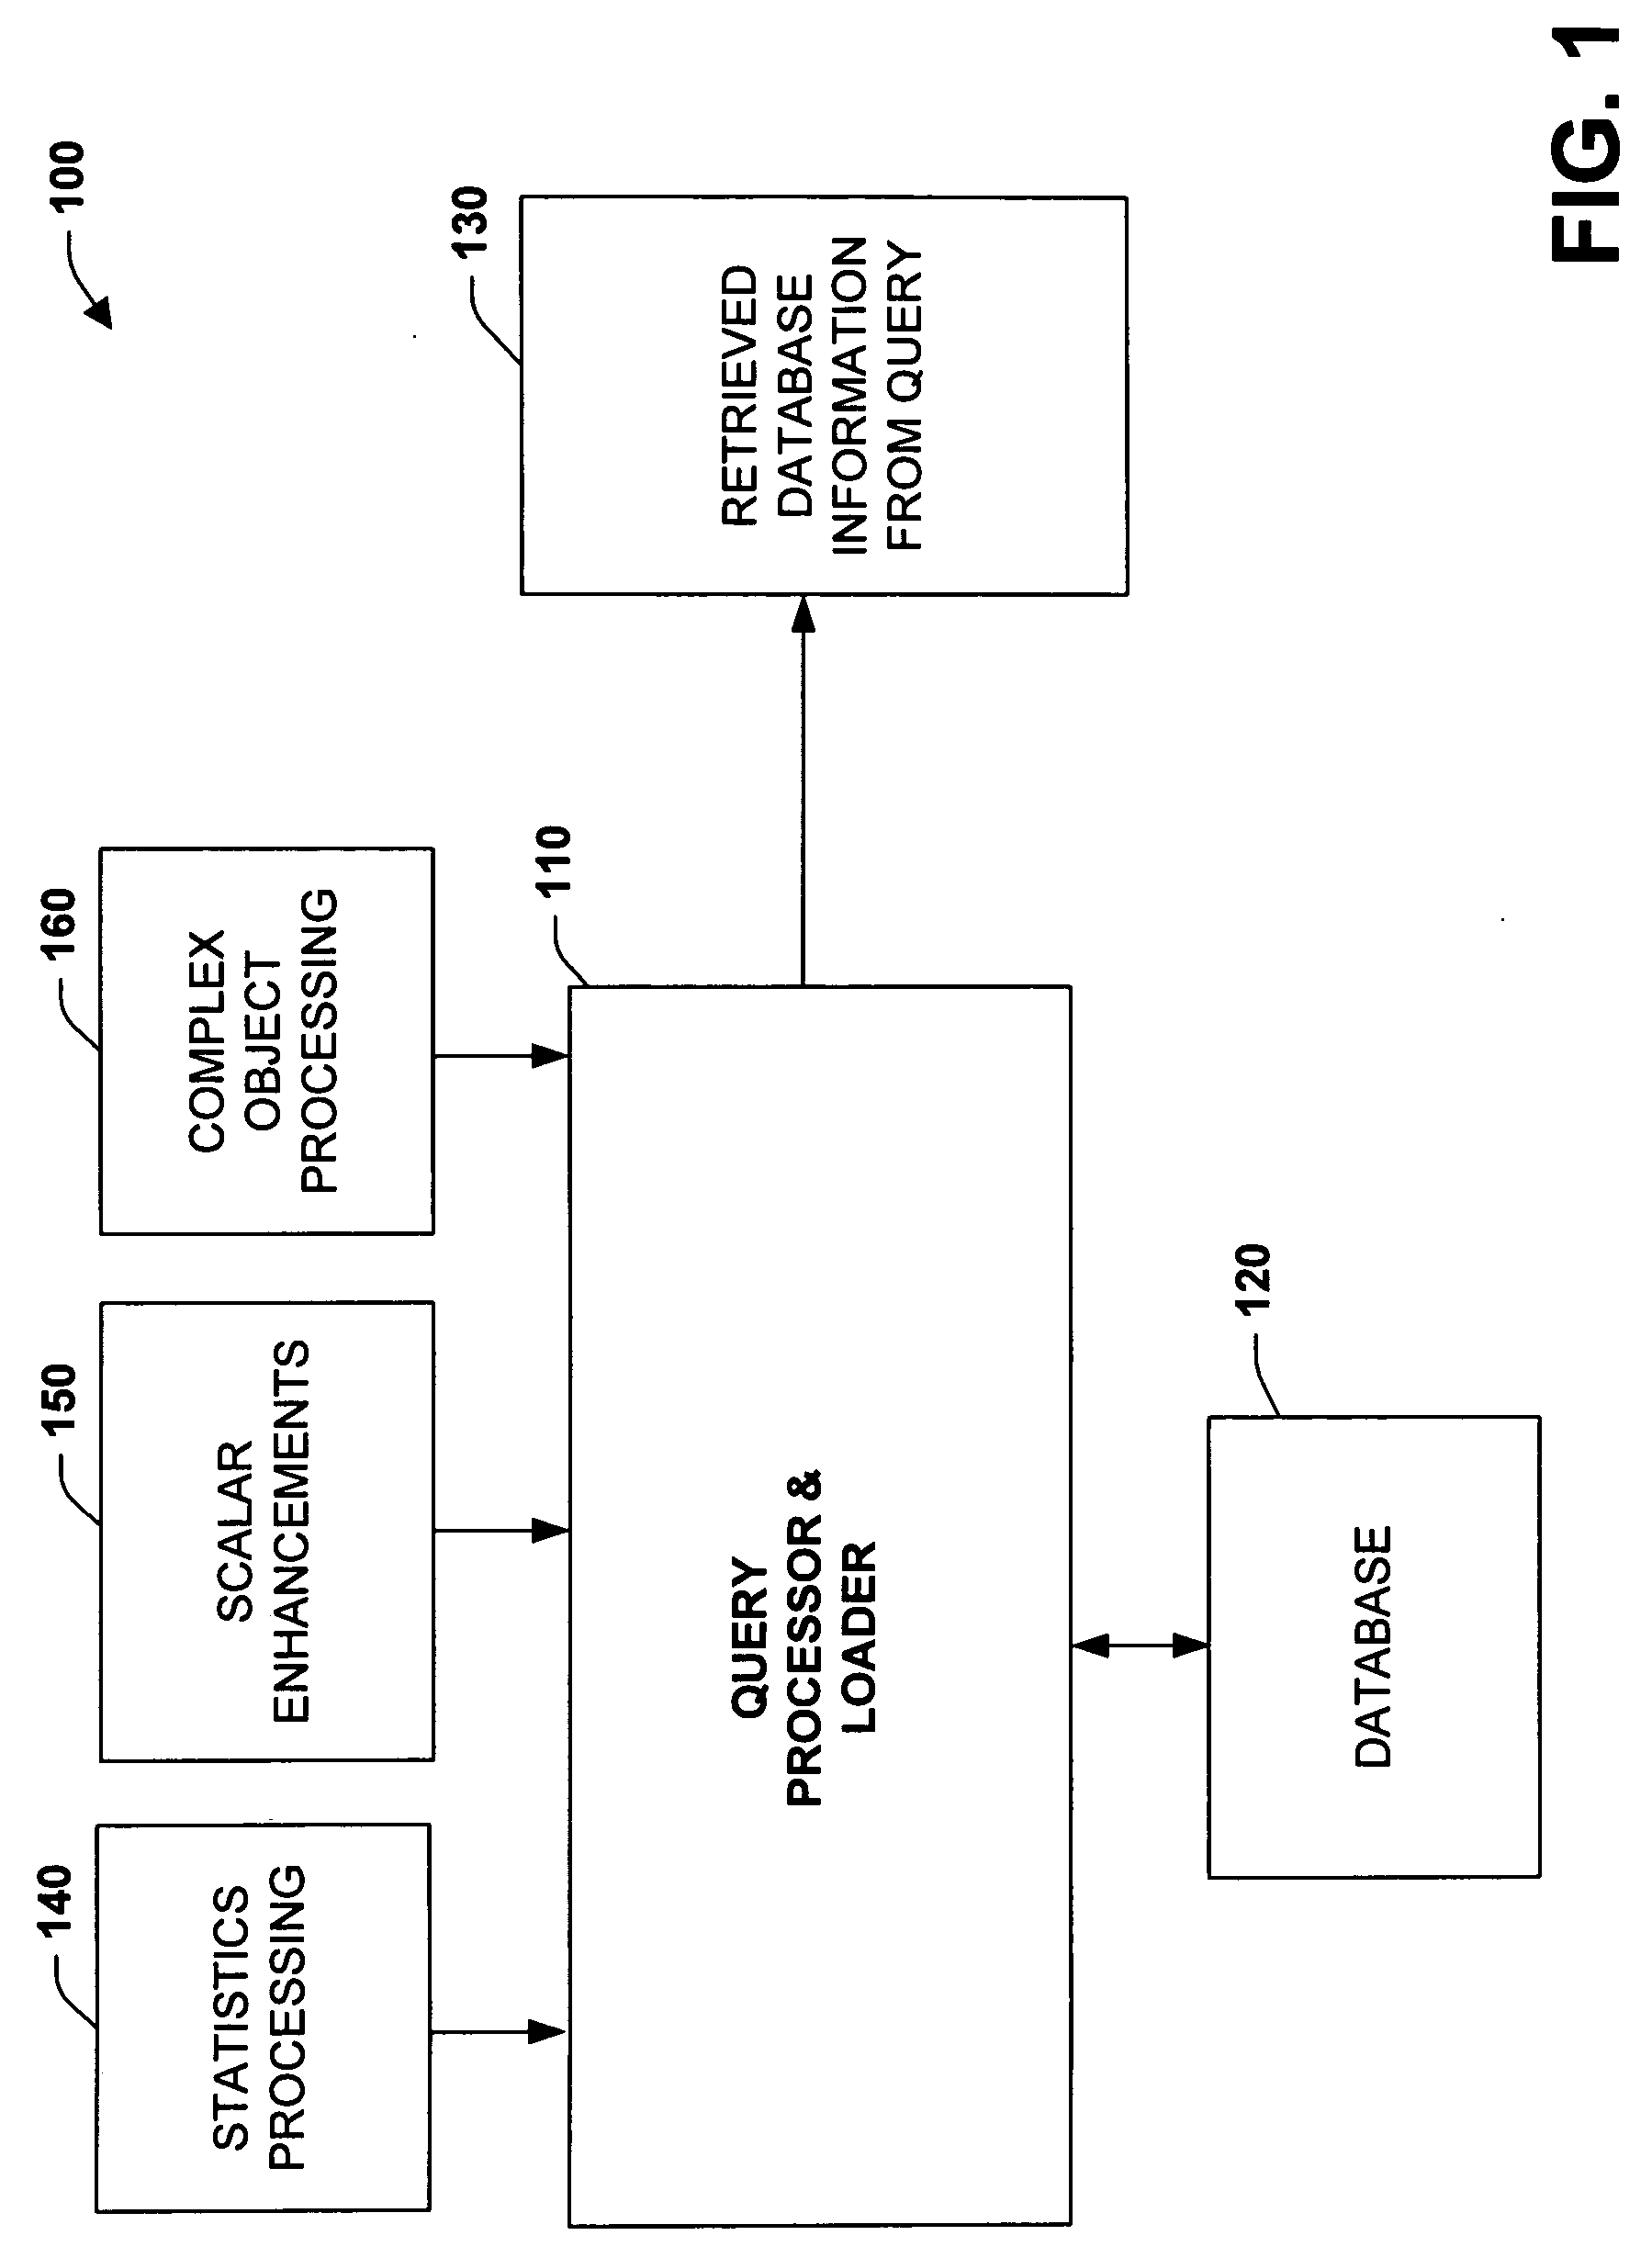 Systems and methods for statistics over complex objects